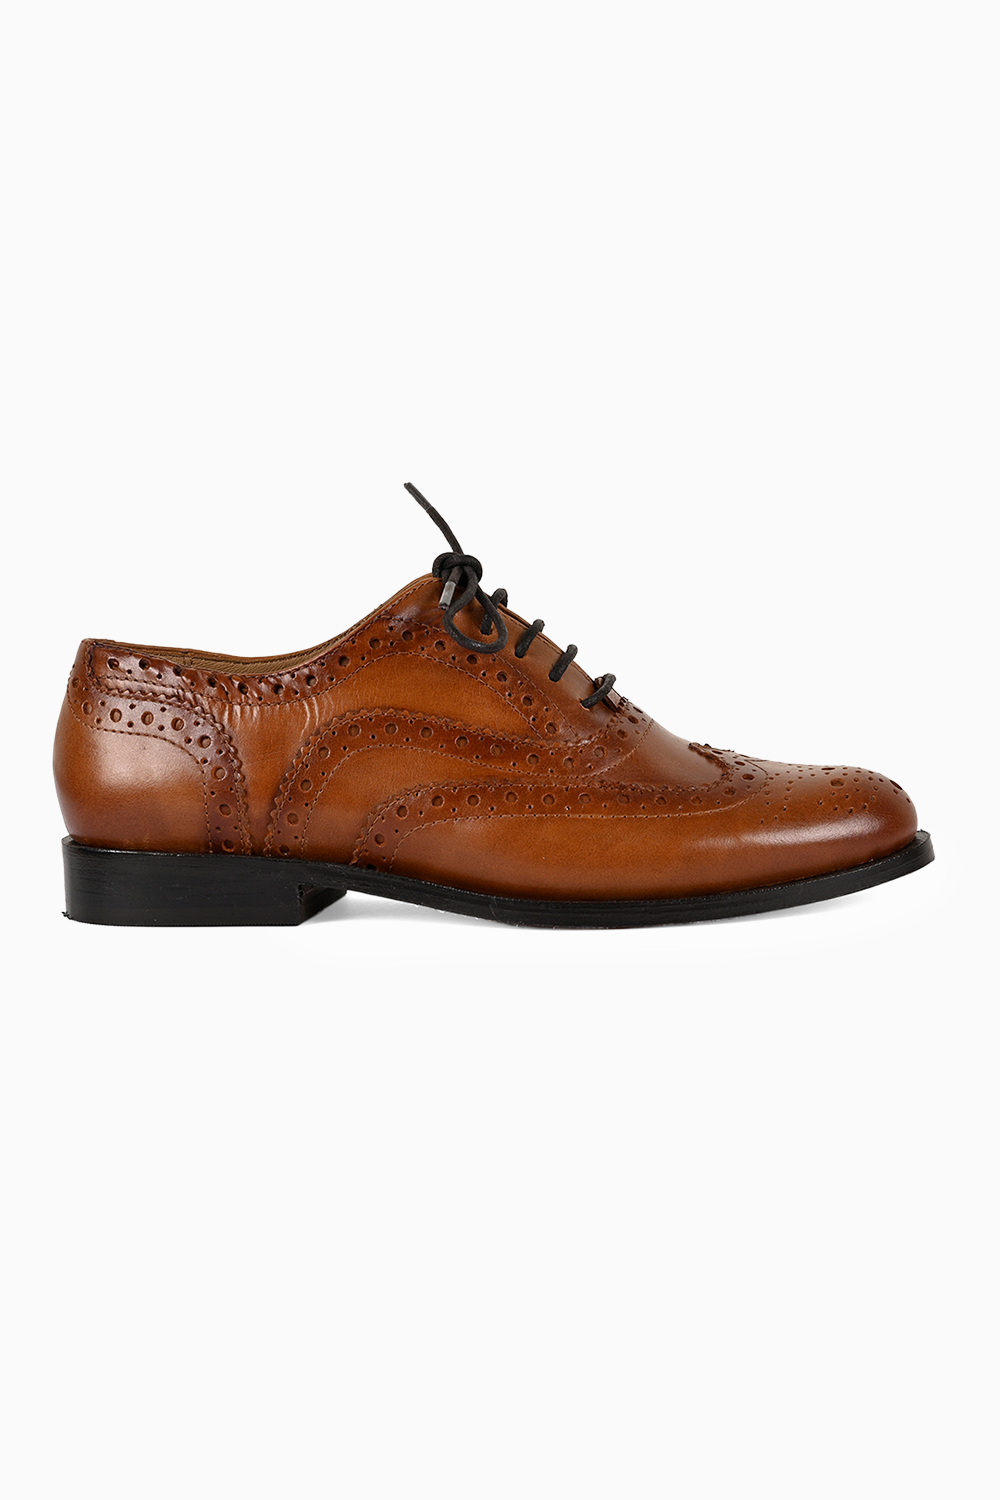 Piper Tan Lace up Shoes